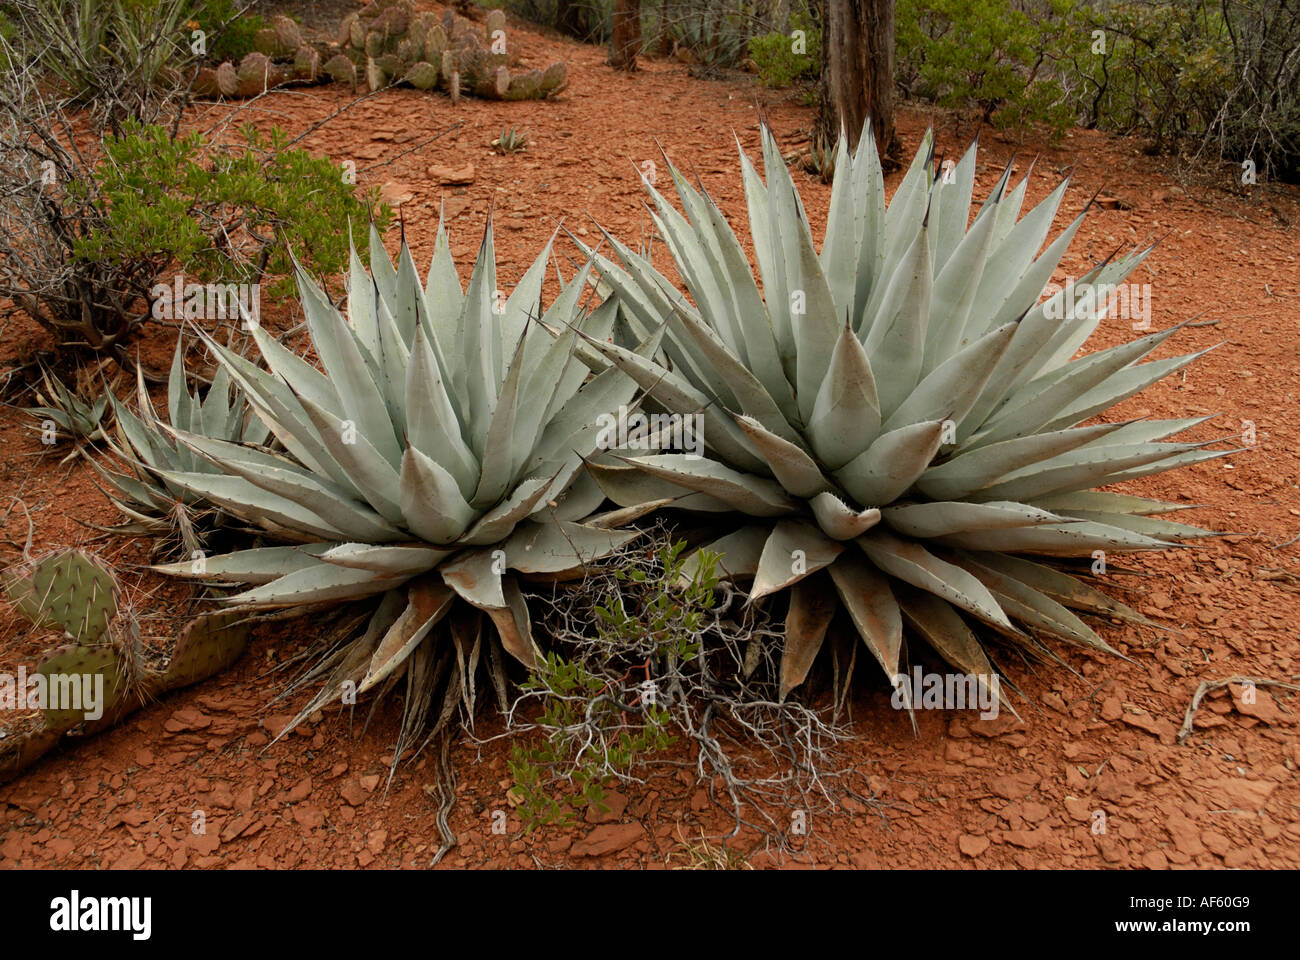 Agave, Century Plants, Agave parryi, Coconino National Forest, Arizona Stock Photo